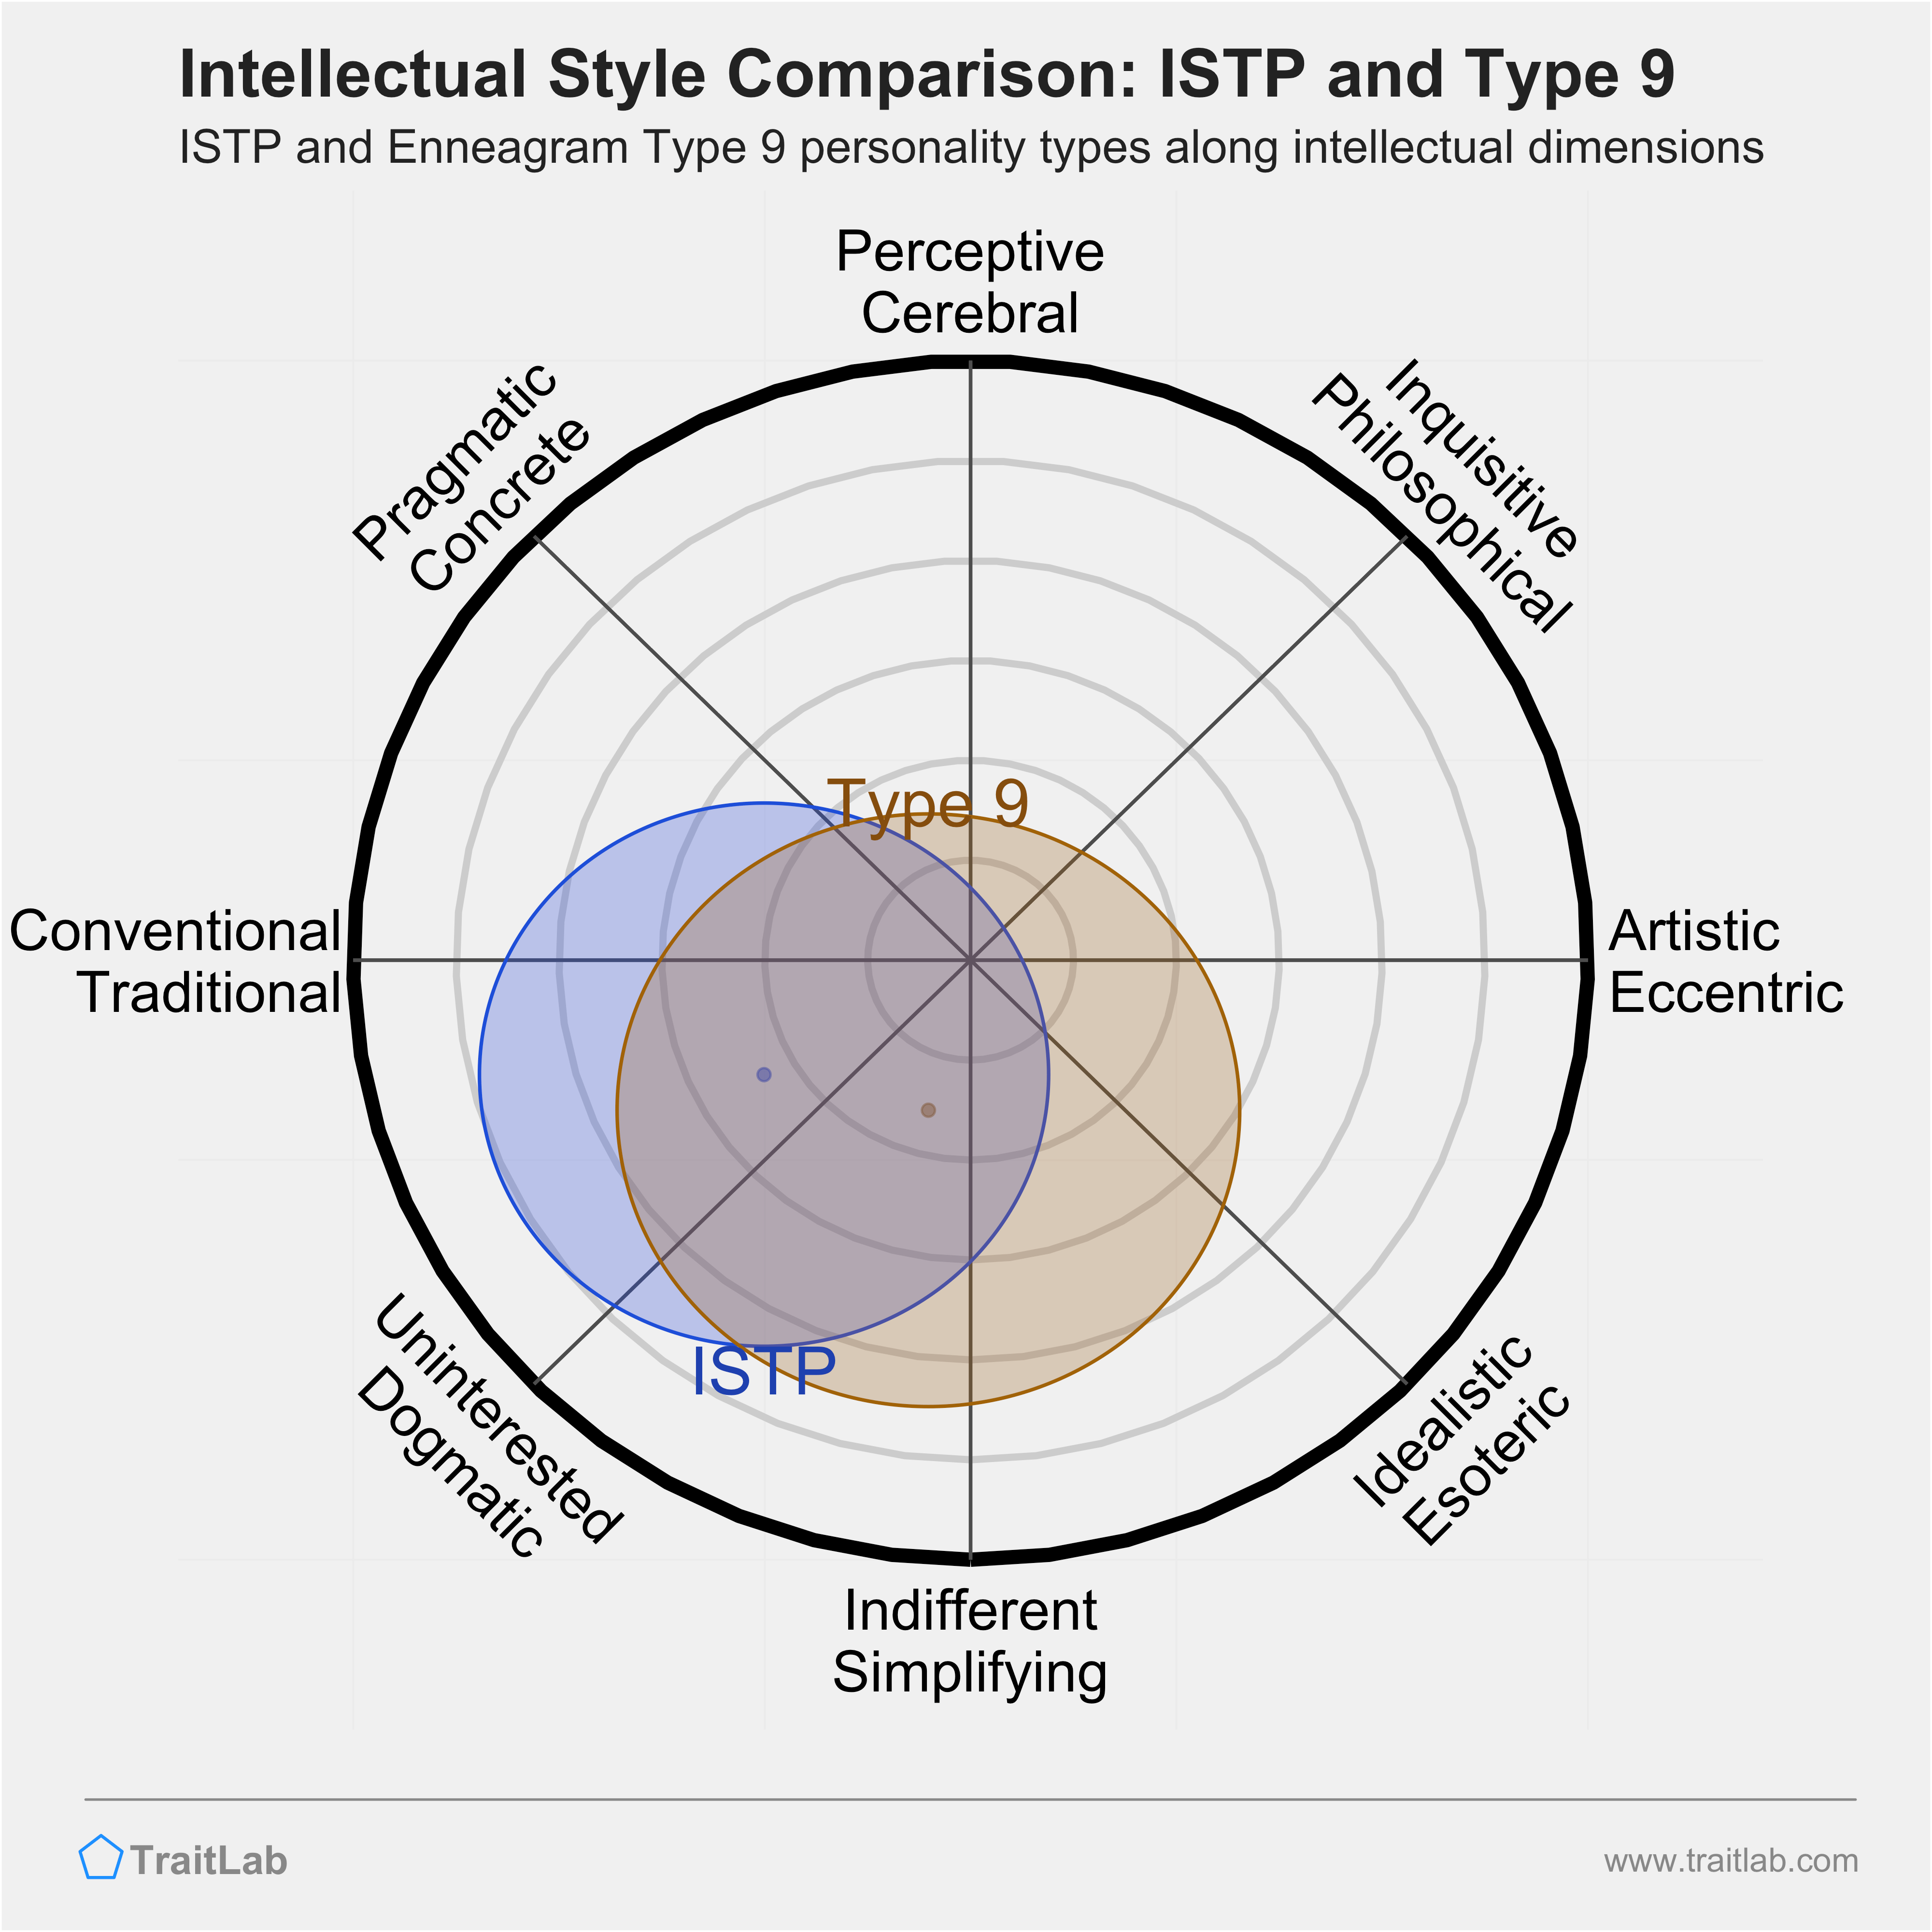 ISTP and Type 9 comparison across intellectual dimensions